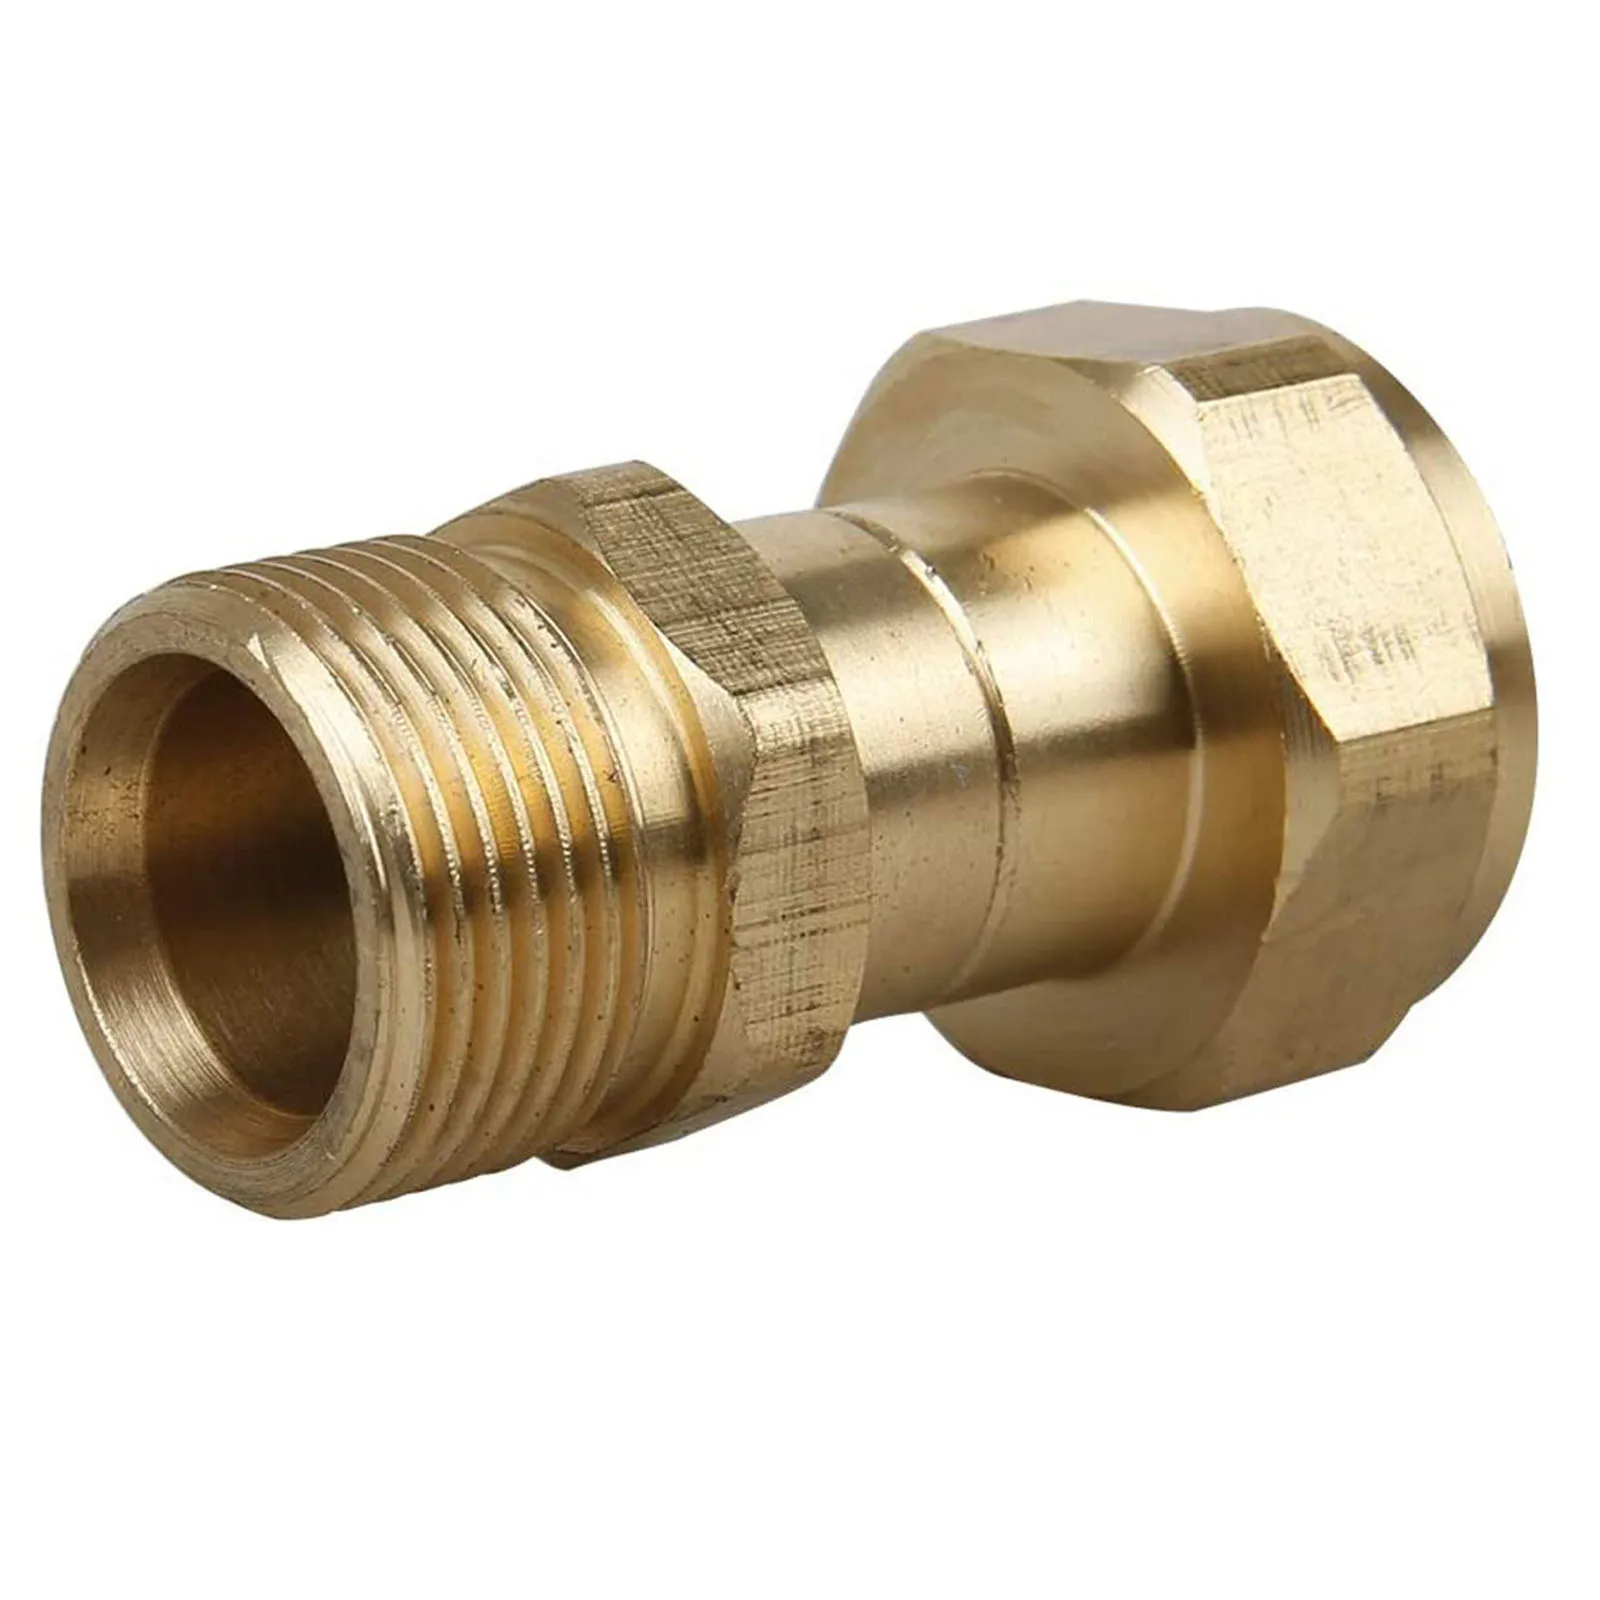 

M22 14mm Thread Fitting Washer Adapter Washer Adapter Swivel Joint 360 Degree Rotation Copper Durable For Pressure Washers